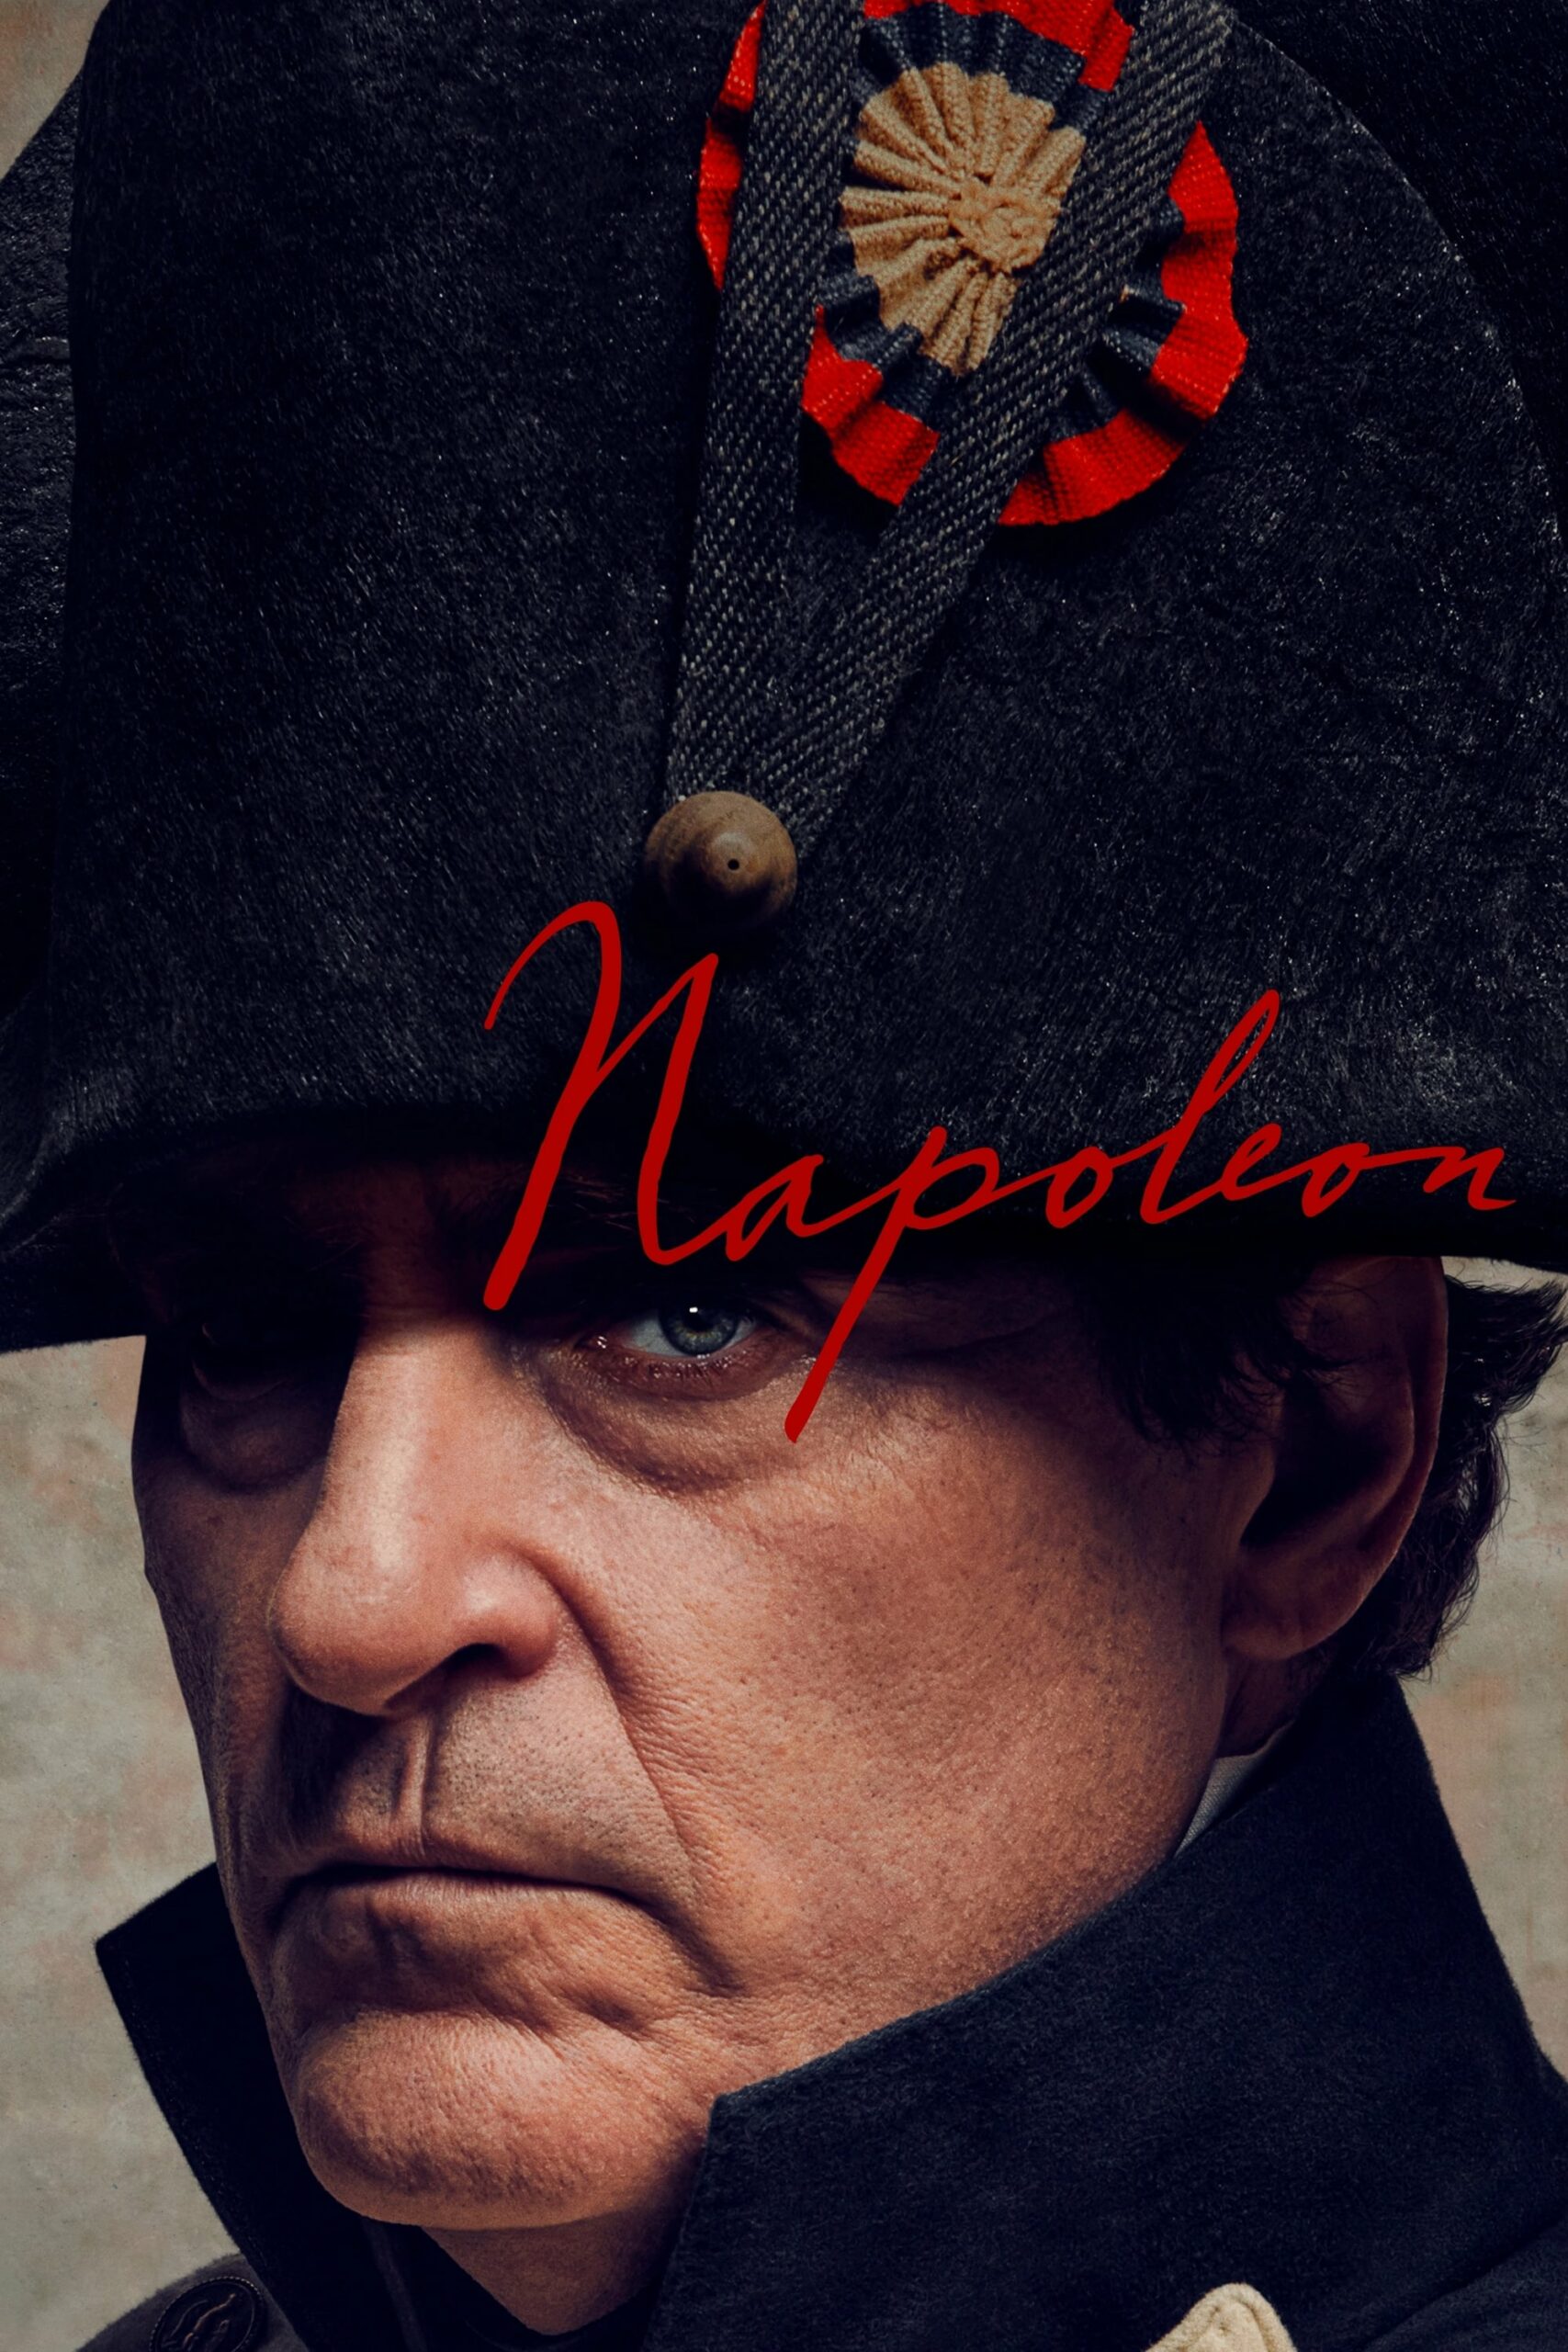 Poster for the movie "Napoleon"